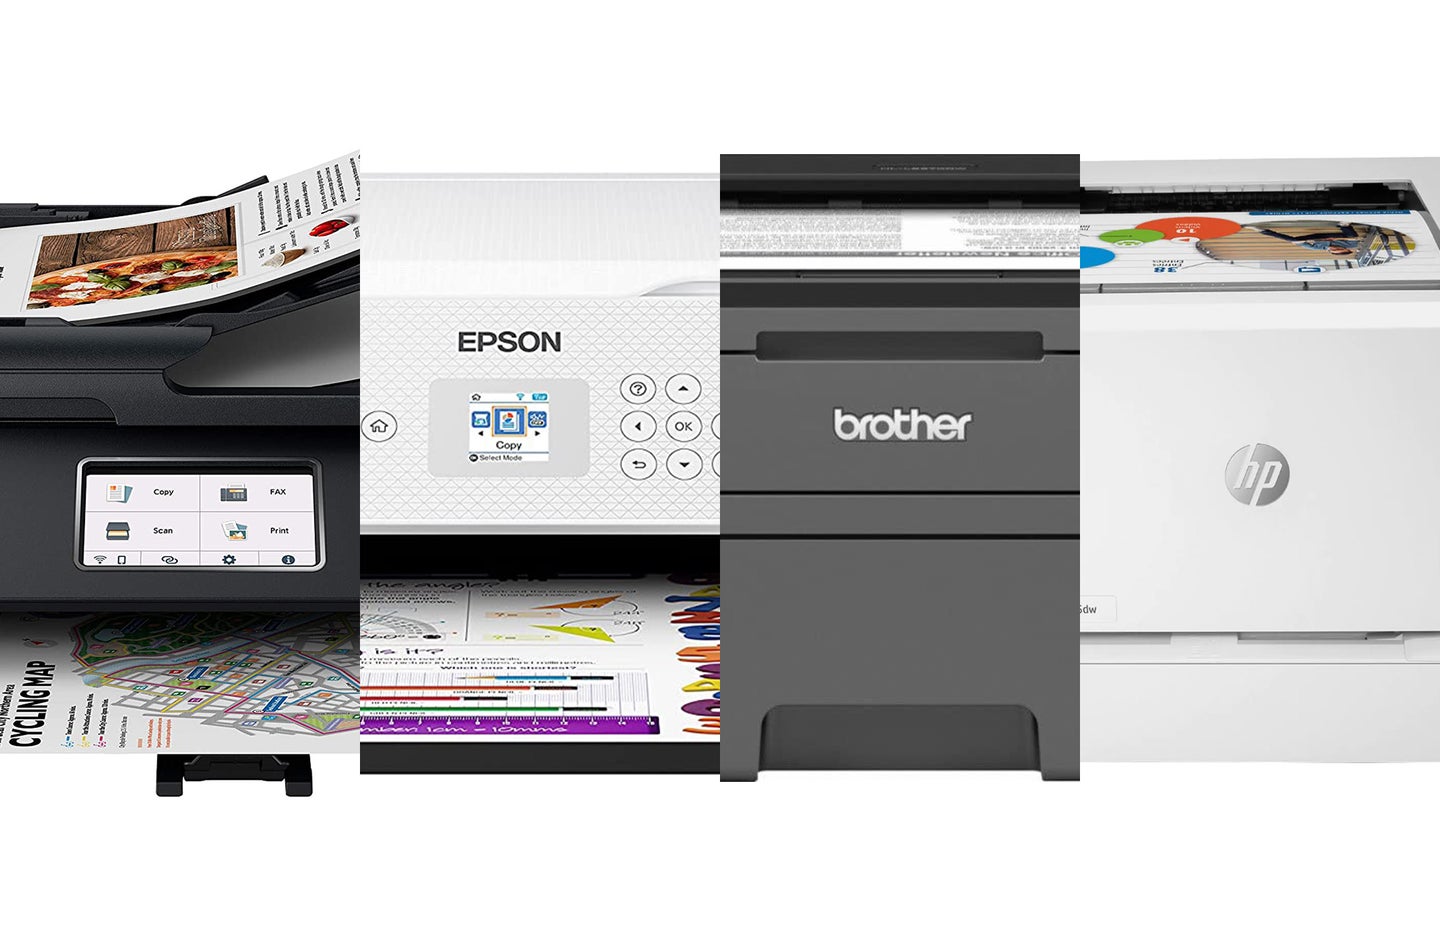 The best printers for Chromebooks